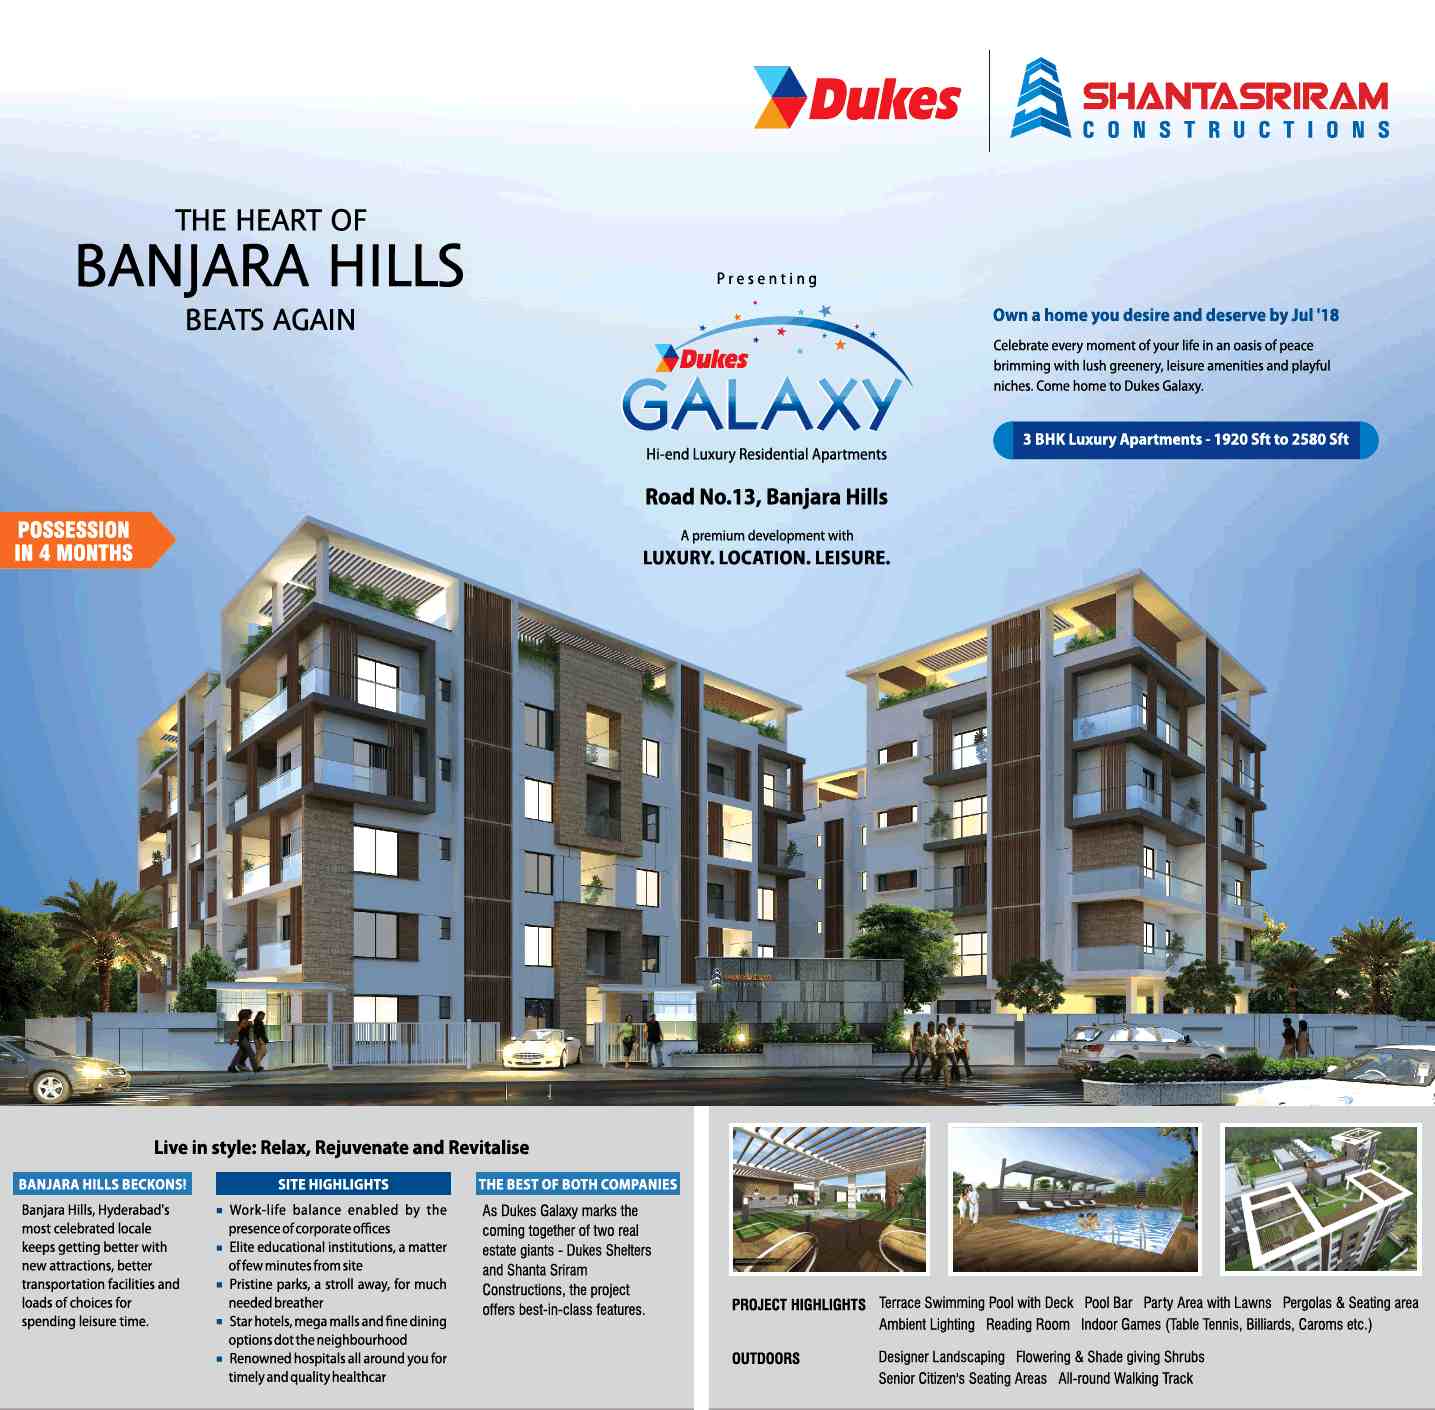 Own a home you desire and deserve at Shanta Sriram Dukes Galaxy in Hyderabad Update